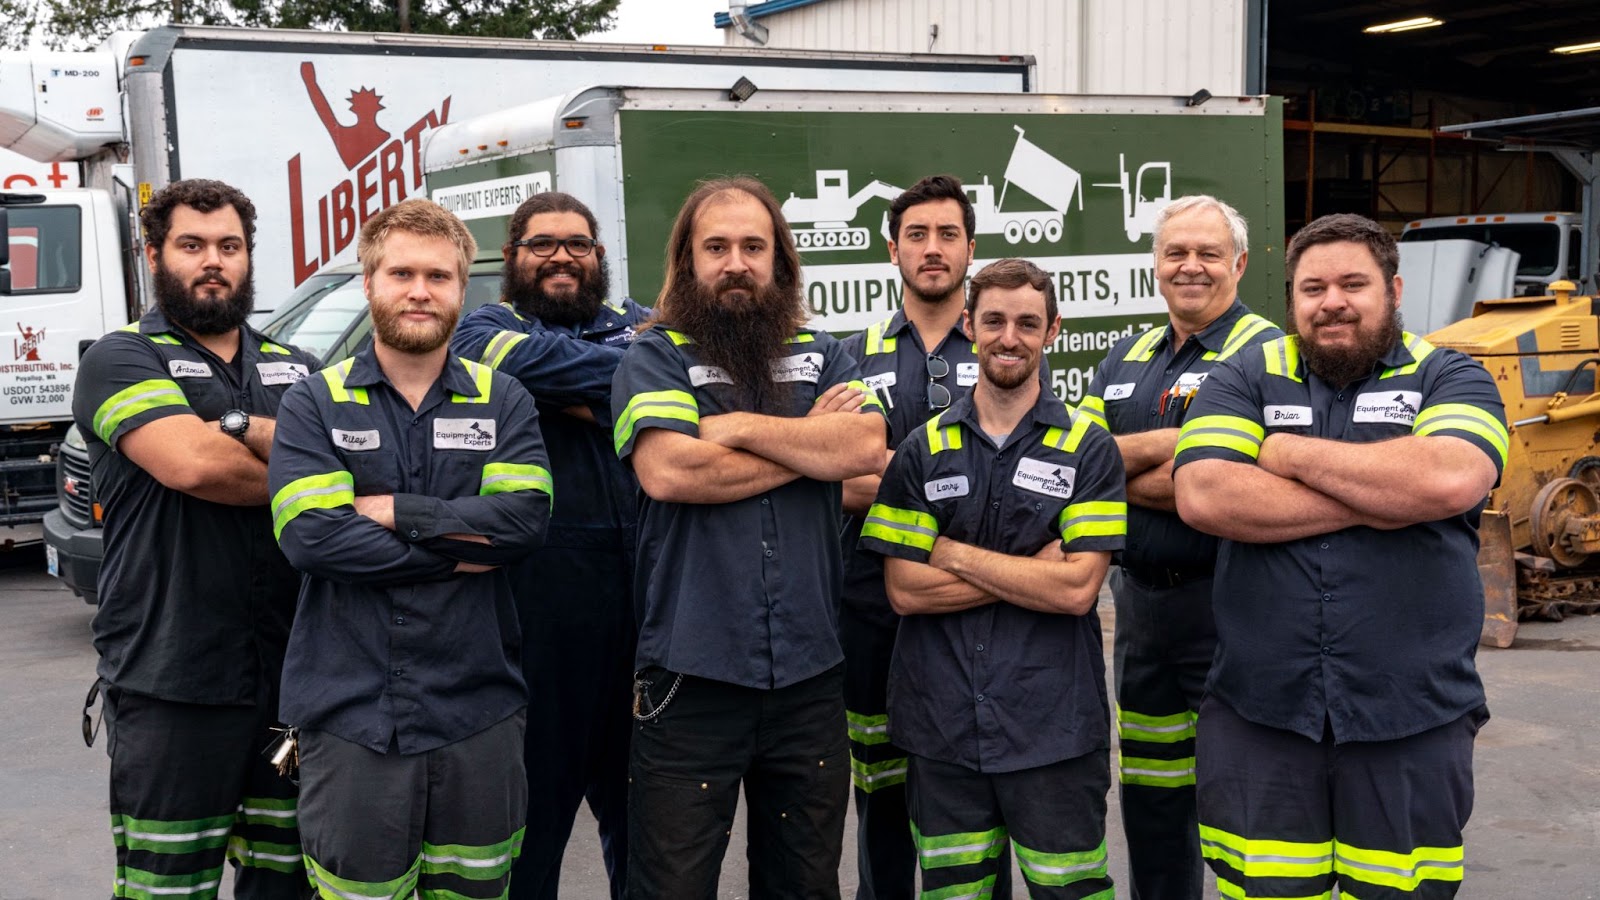 A team of mechanics smiling with their arms folded, all in front of Equipment Experts equipment